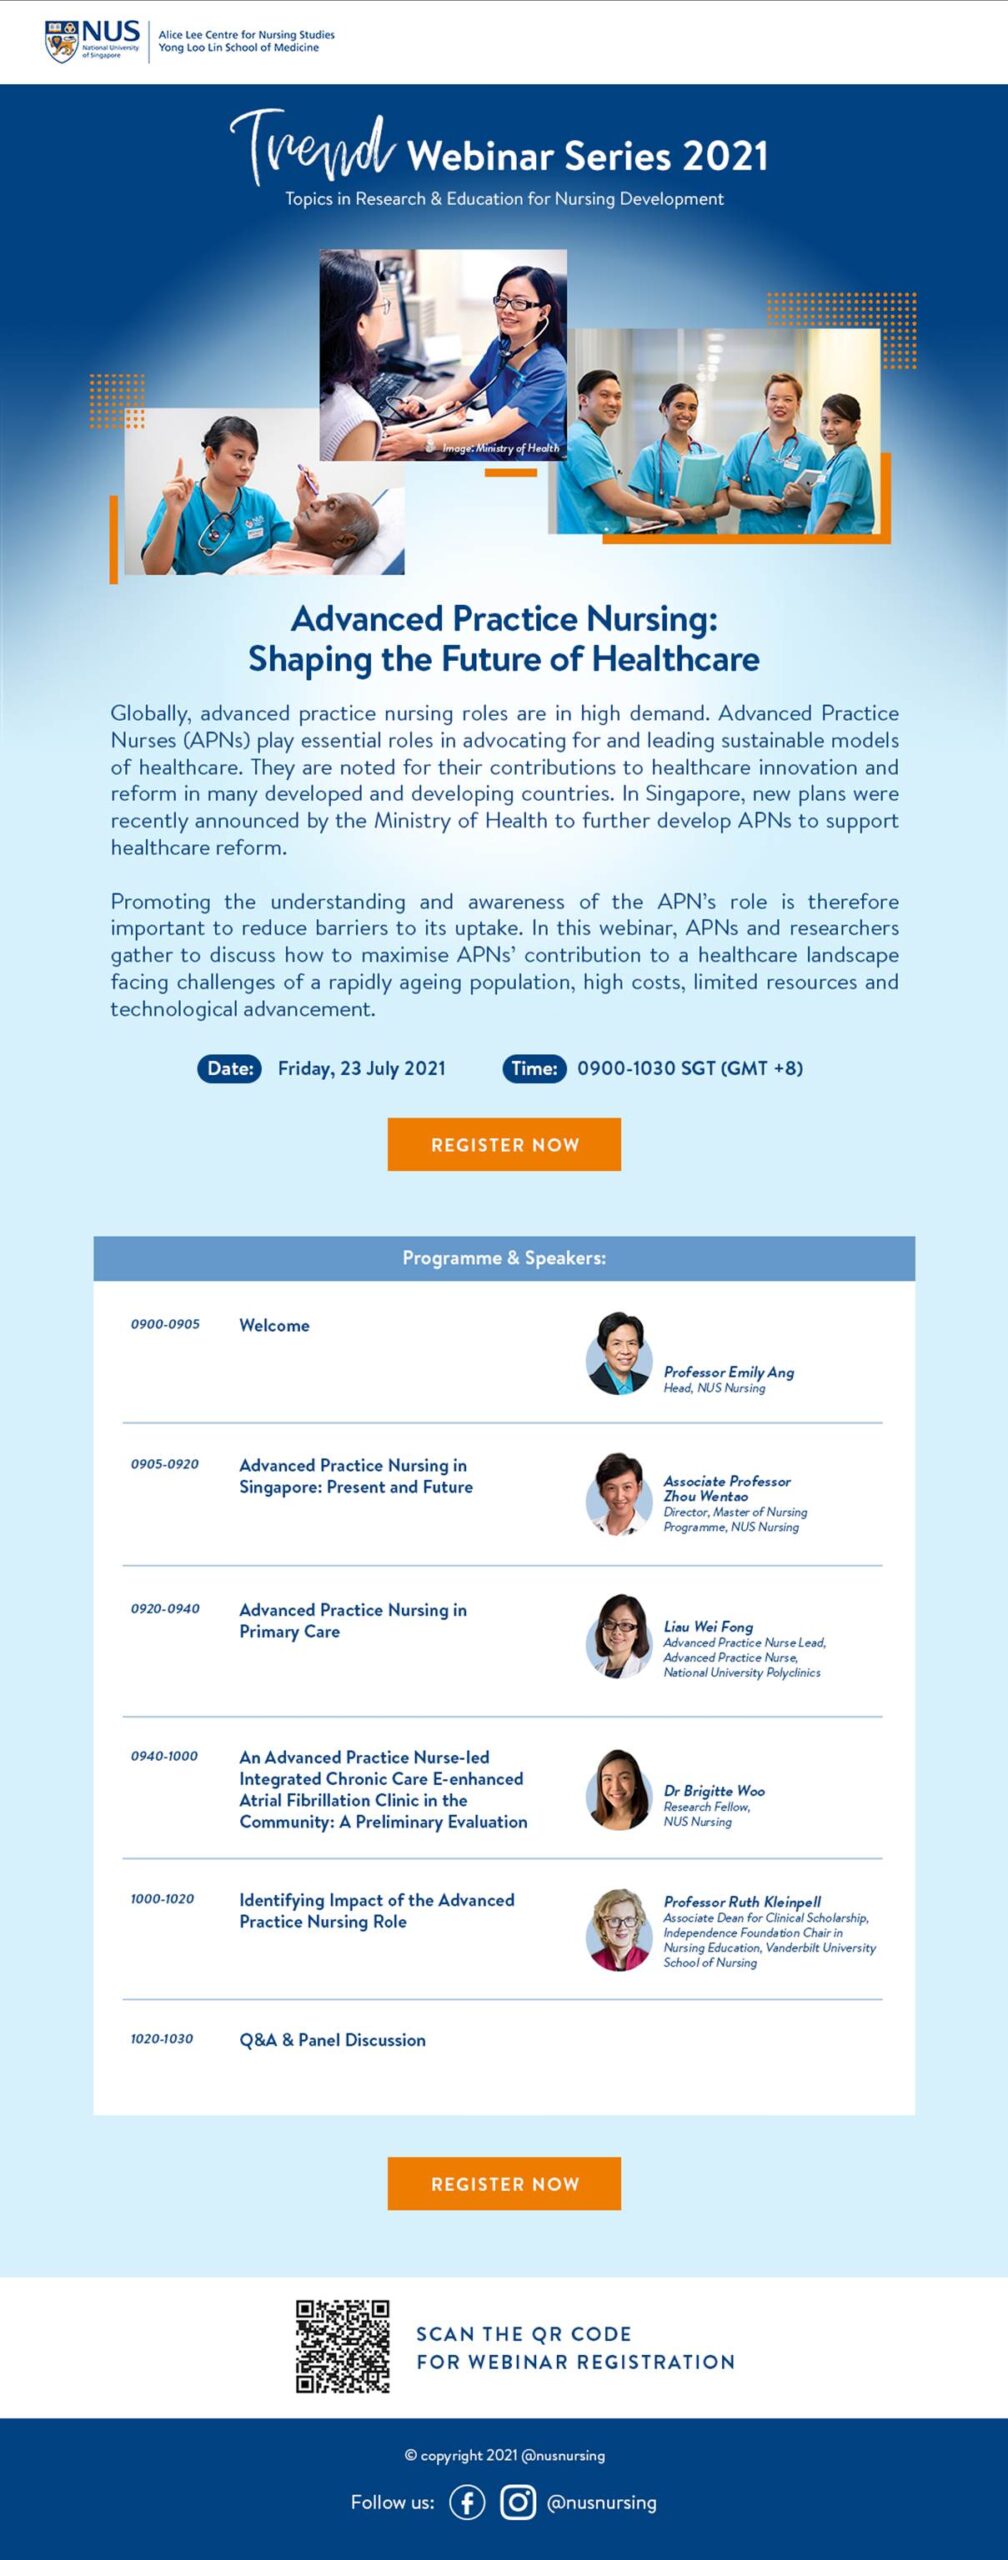 [ALCNS] (Register Now) TREND Webinar Series: - Advanced Practice Nursing: Shaping the Future of Healthcare (23 July 2021, 9am - 10.30am SGT)